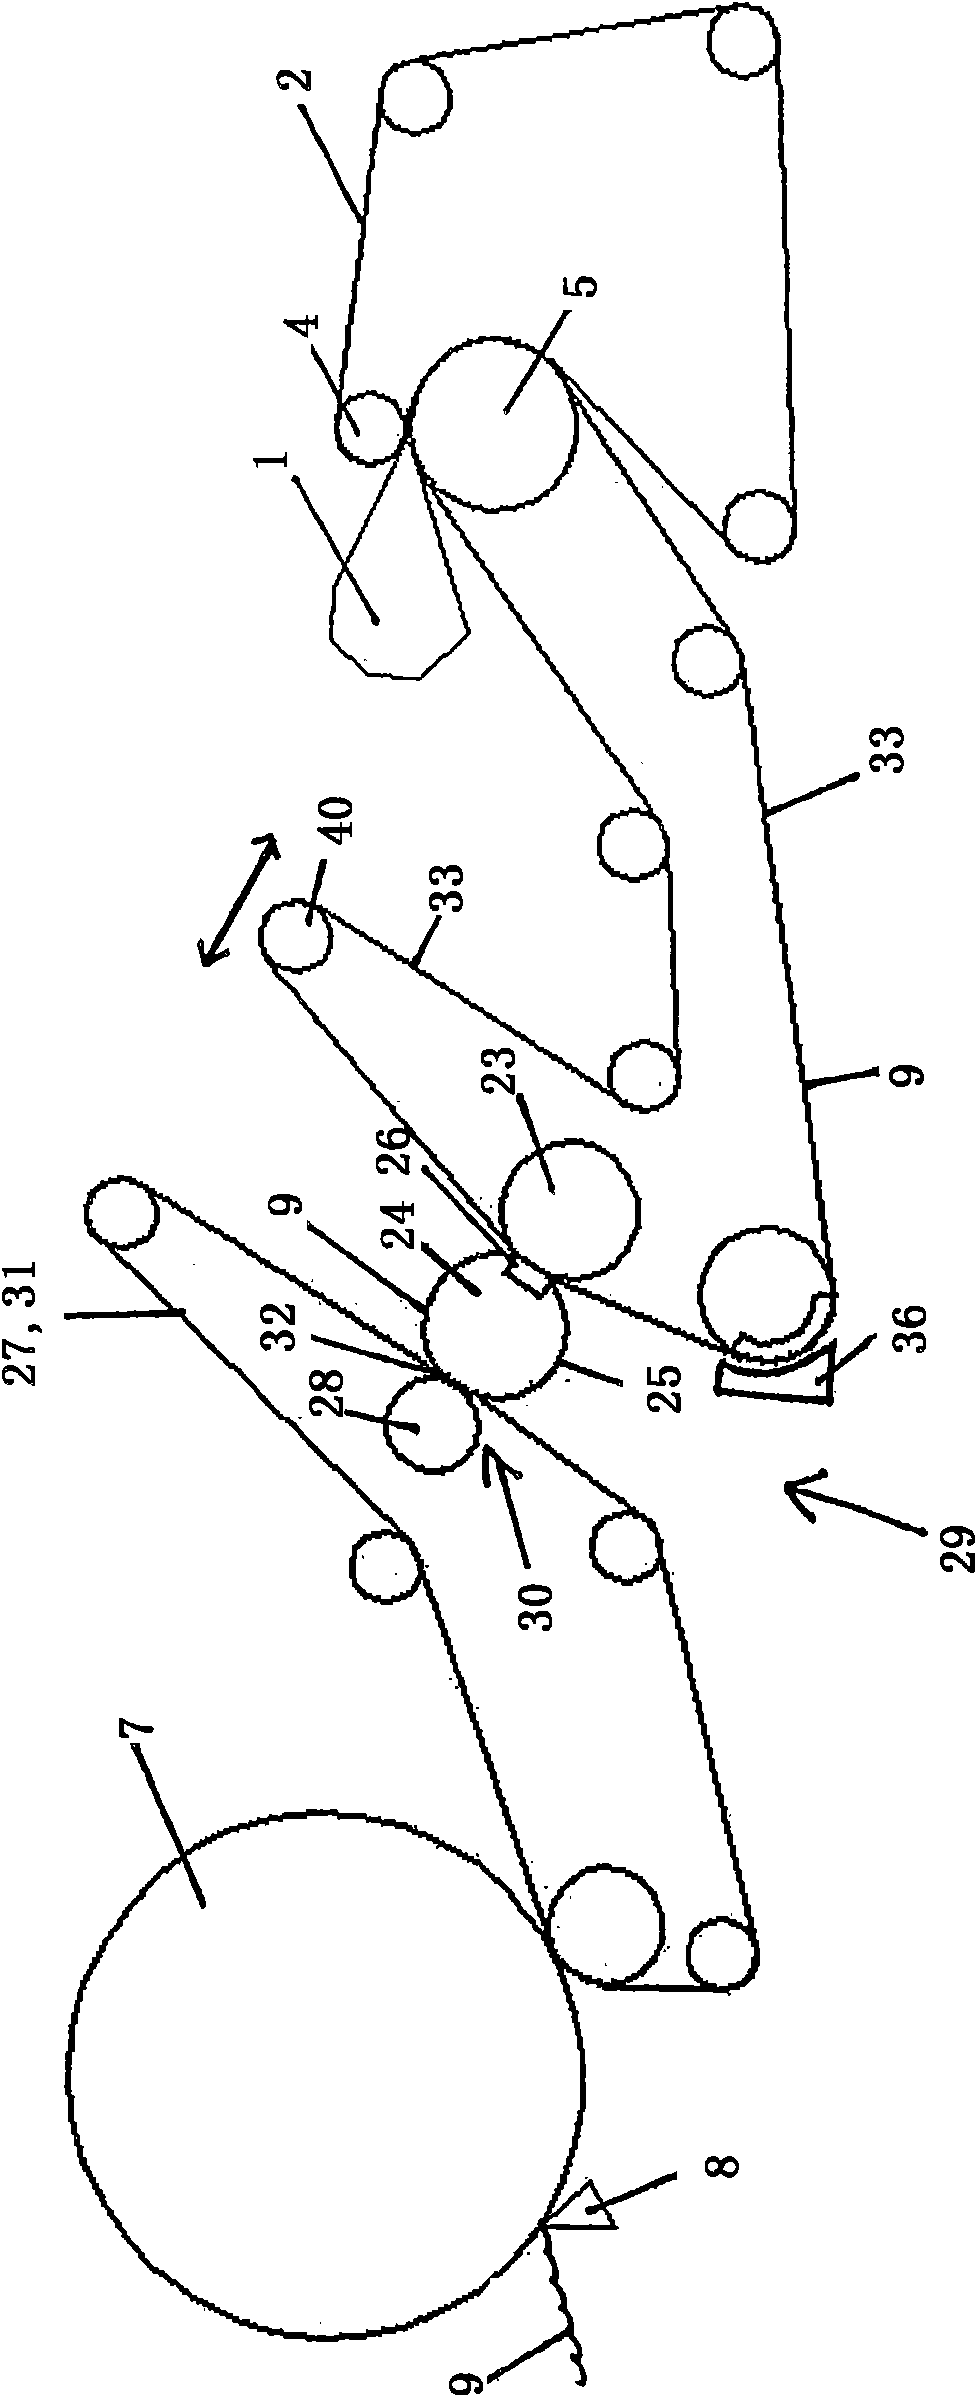 Method and device for treating a strip of fibrous material in a long nip press unit